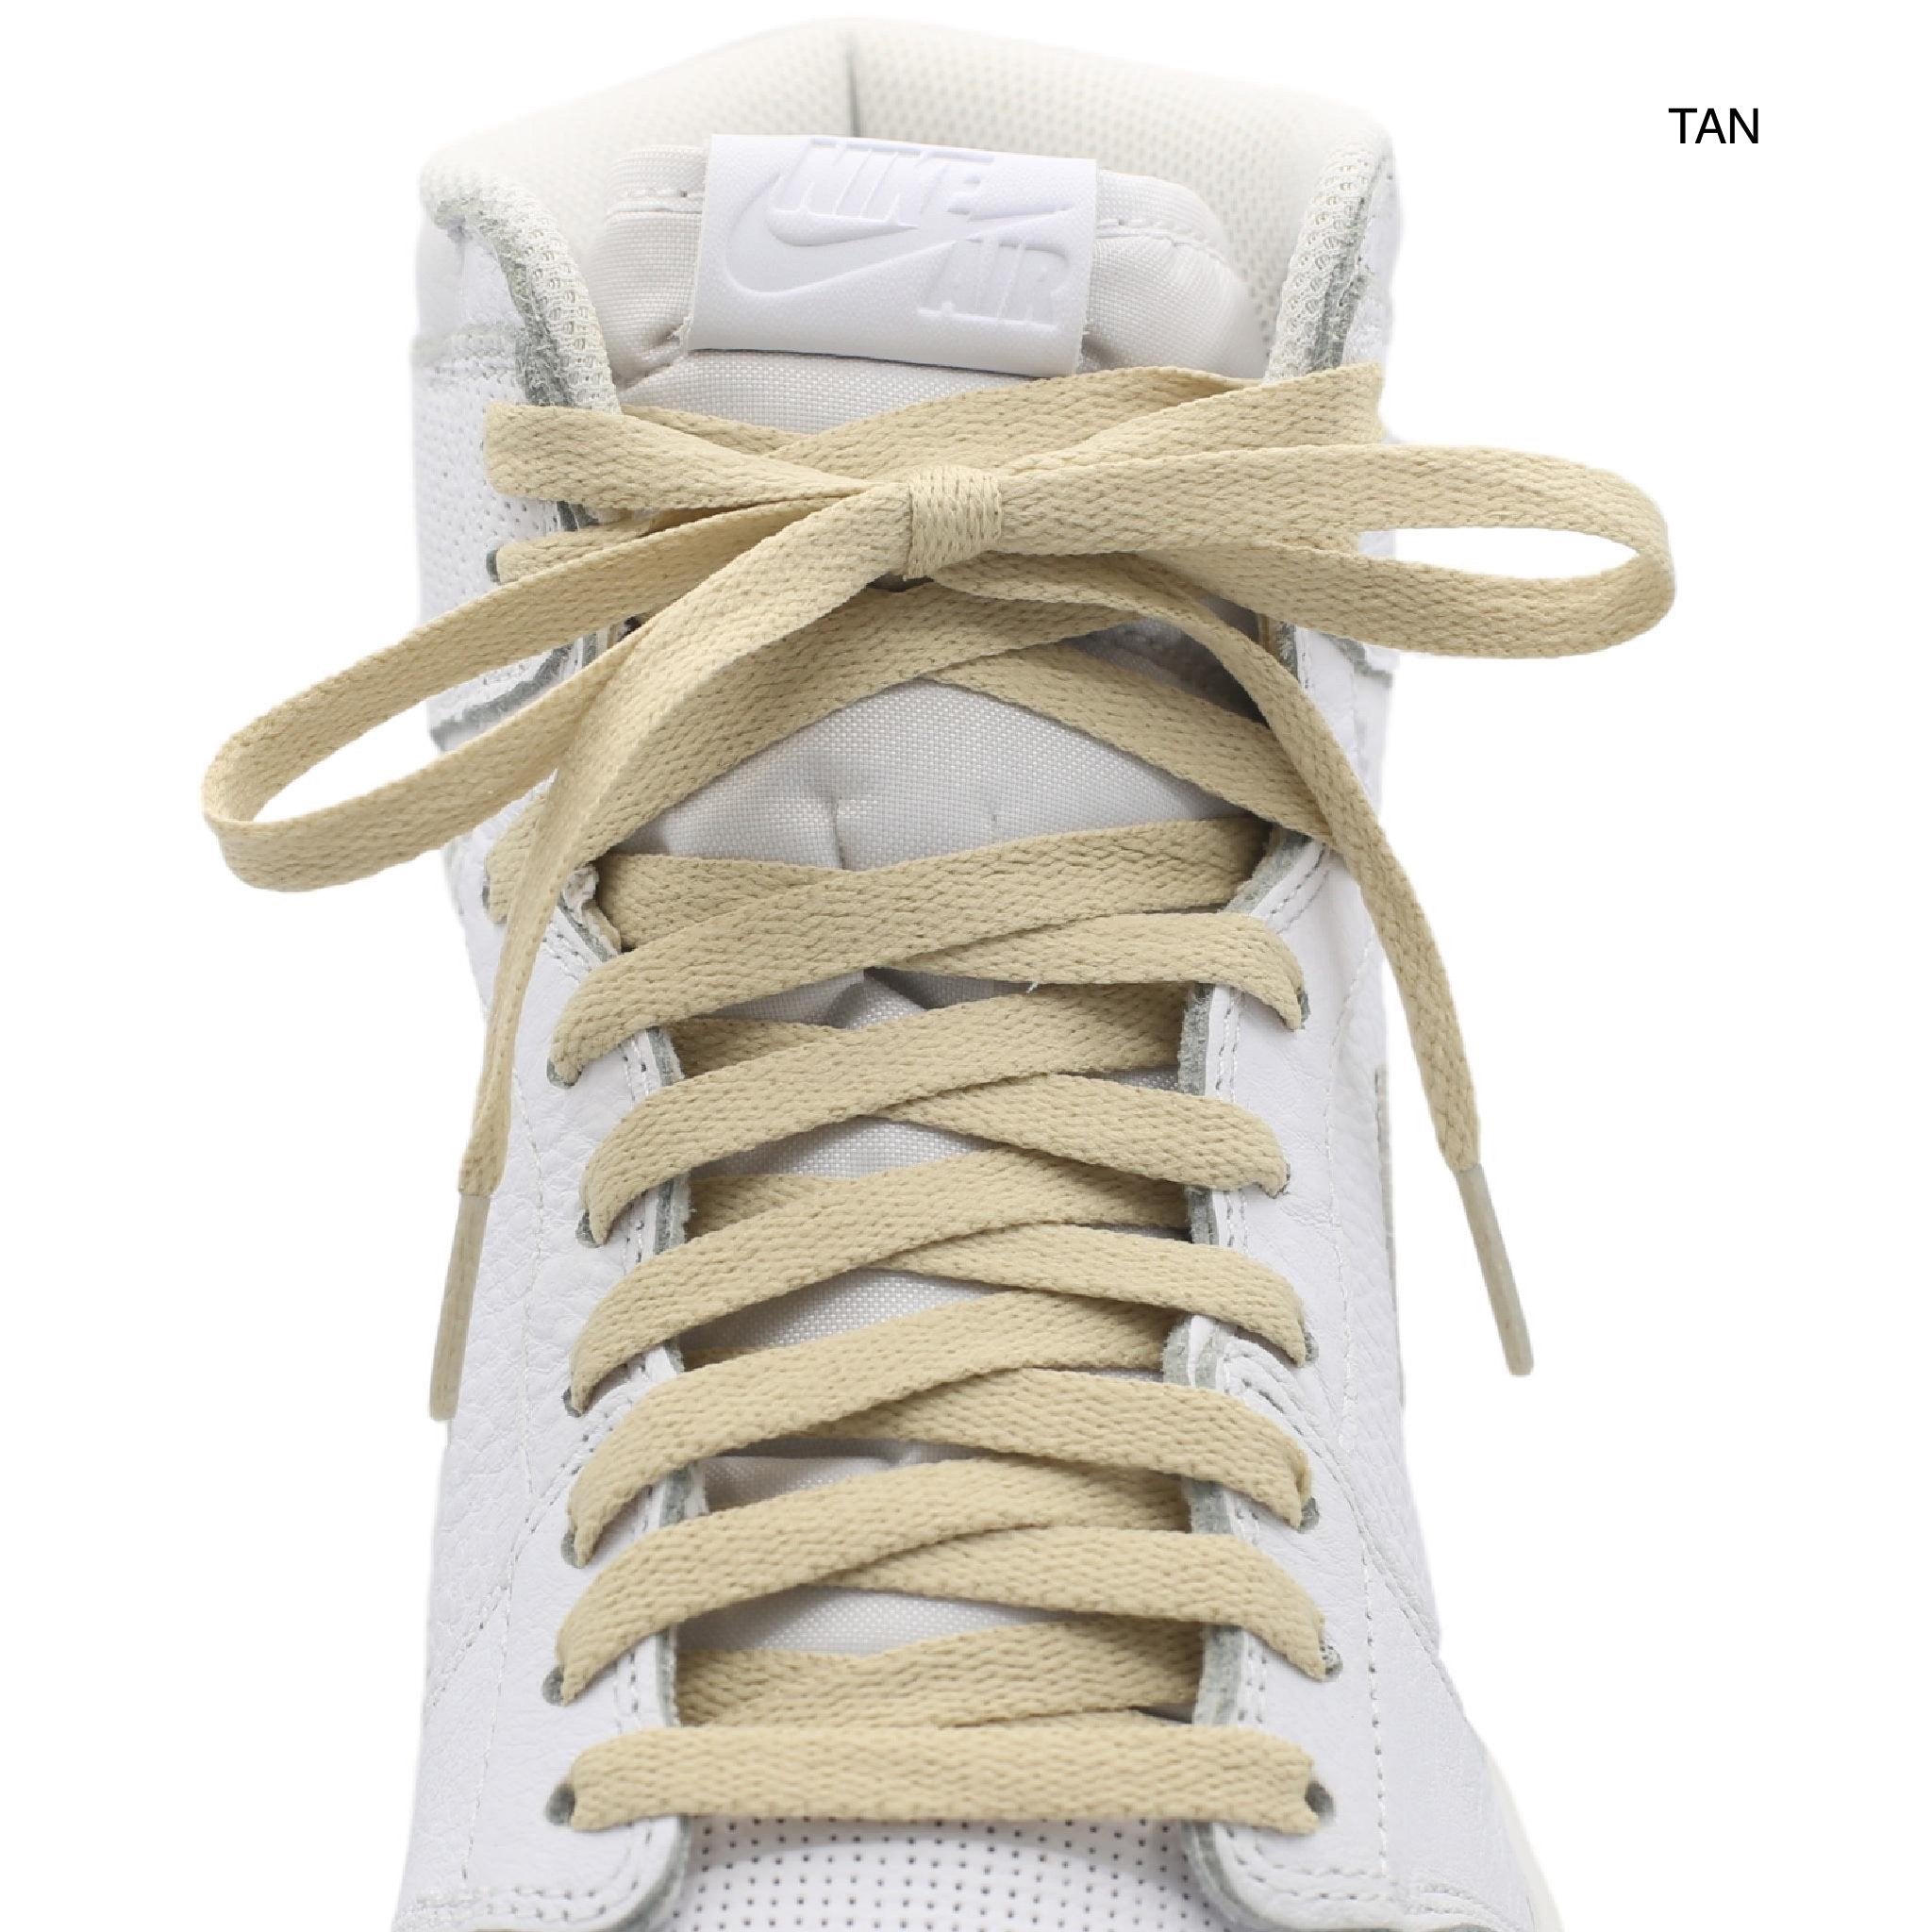 The Best Guide to Shoe Laces (and Lace Swaps)